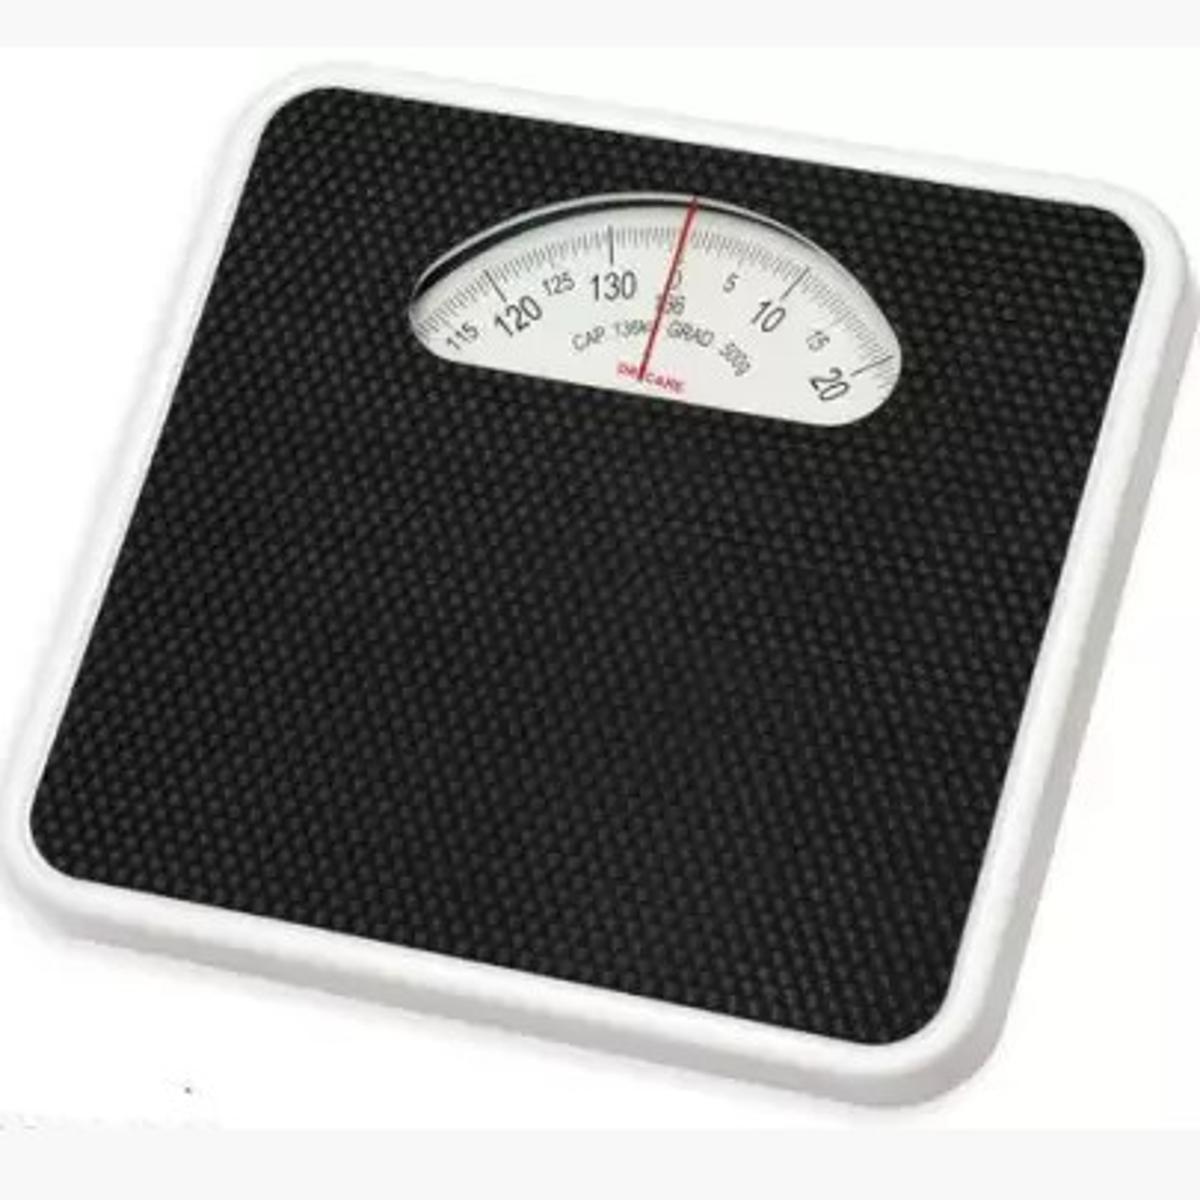 LAICA Mechanical Bathroom Scales for Body Weight, 110Kg Capacity